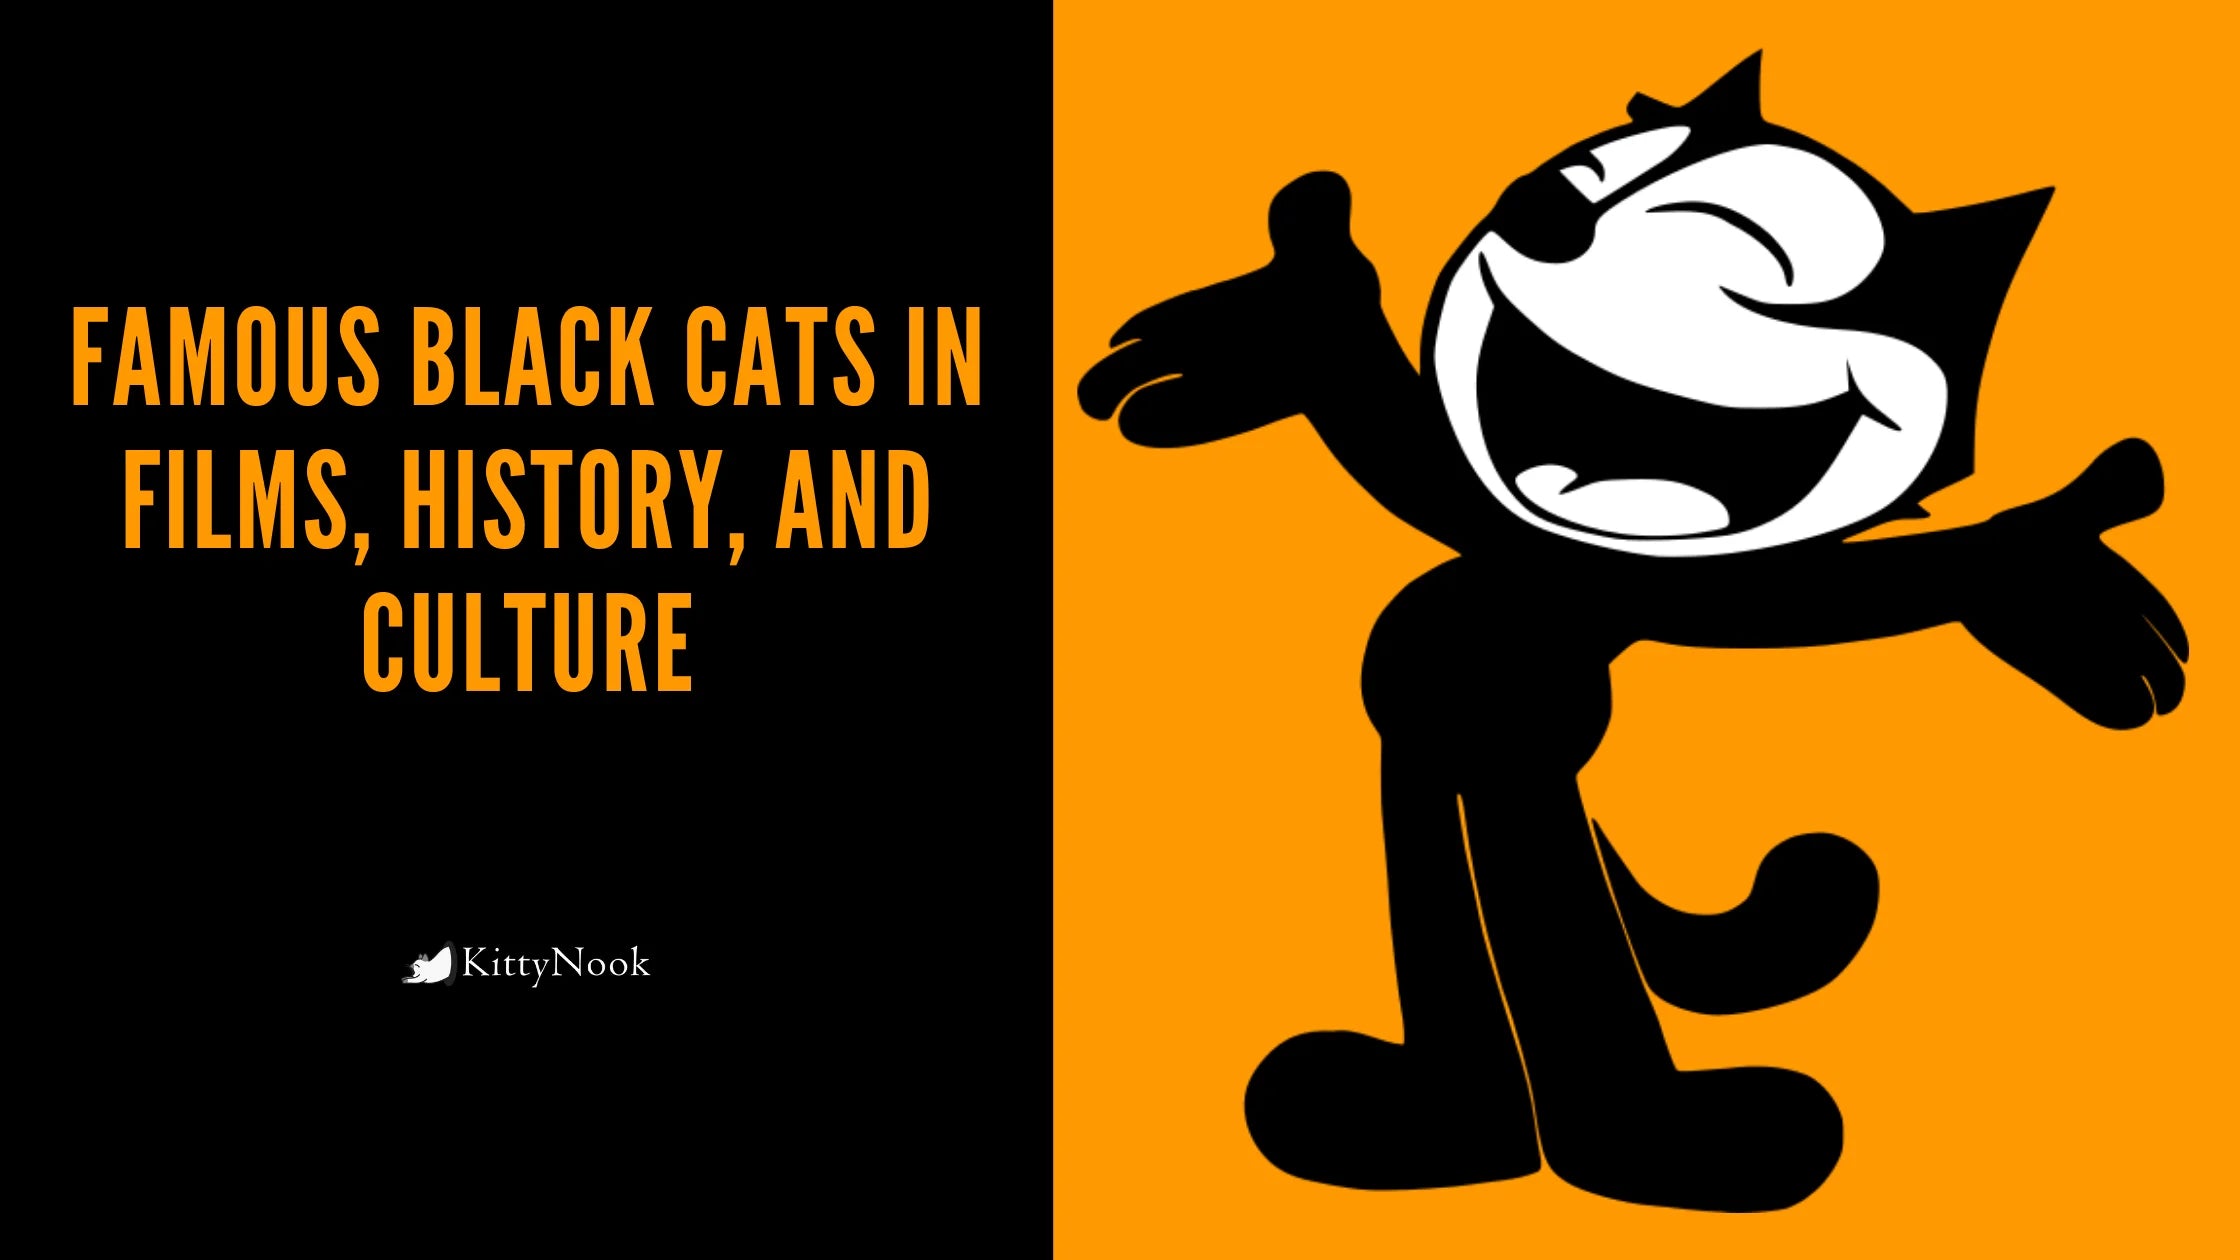 Famous Black Cats in Films, History, and Culture - KittyNook Cat Company